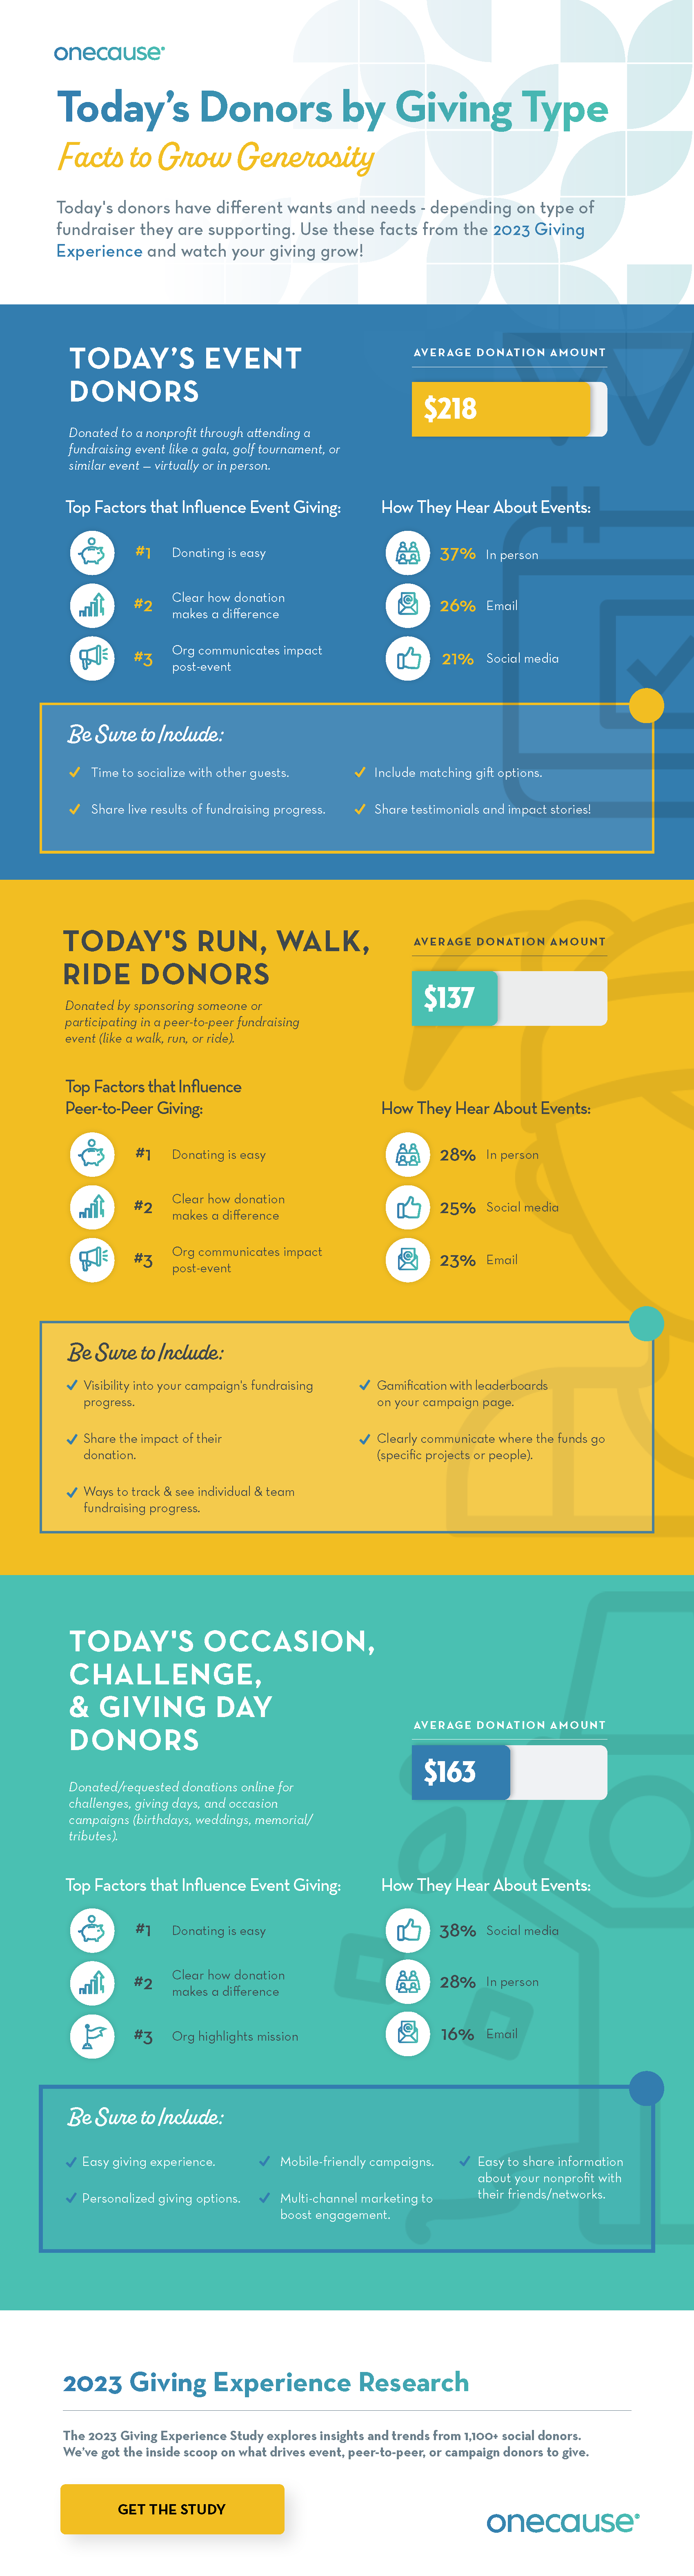 Today's Donors by Event Type: Keys to Unlock Giving